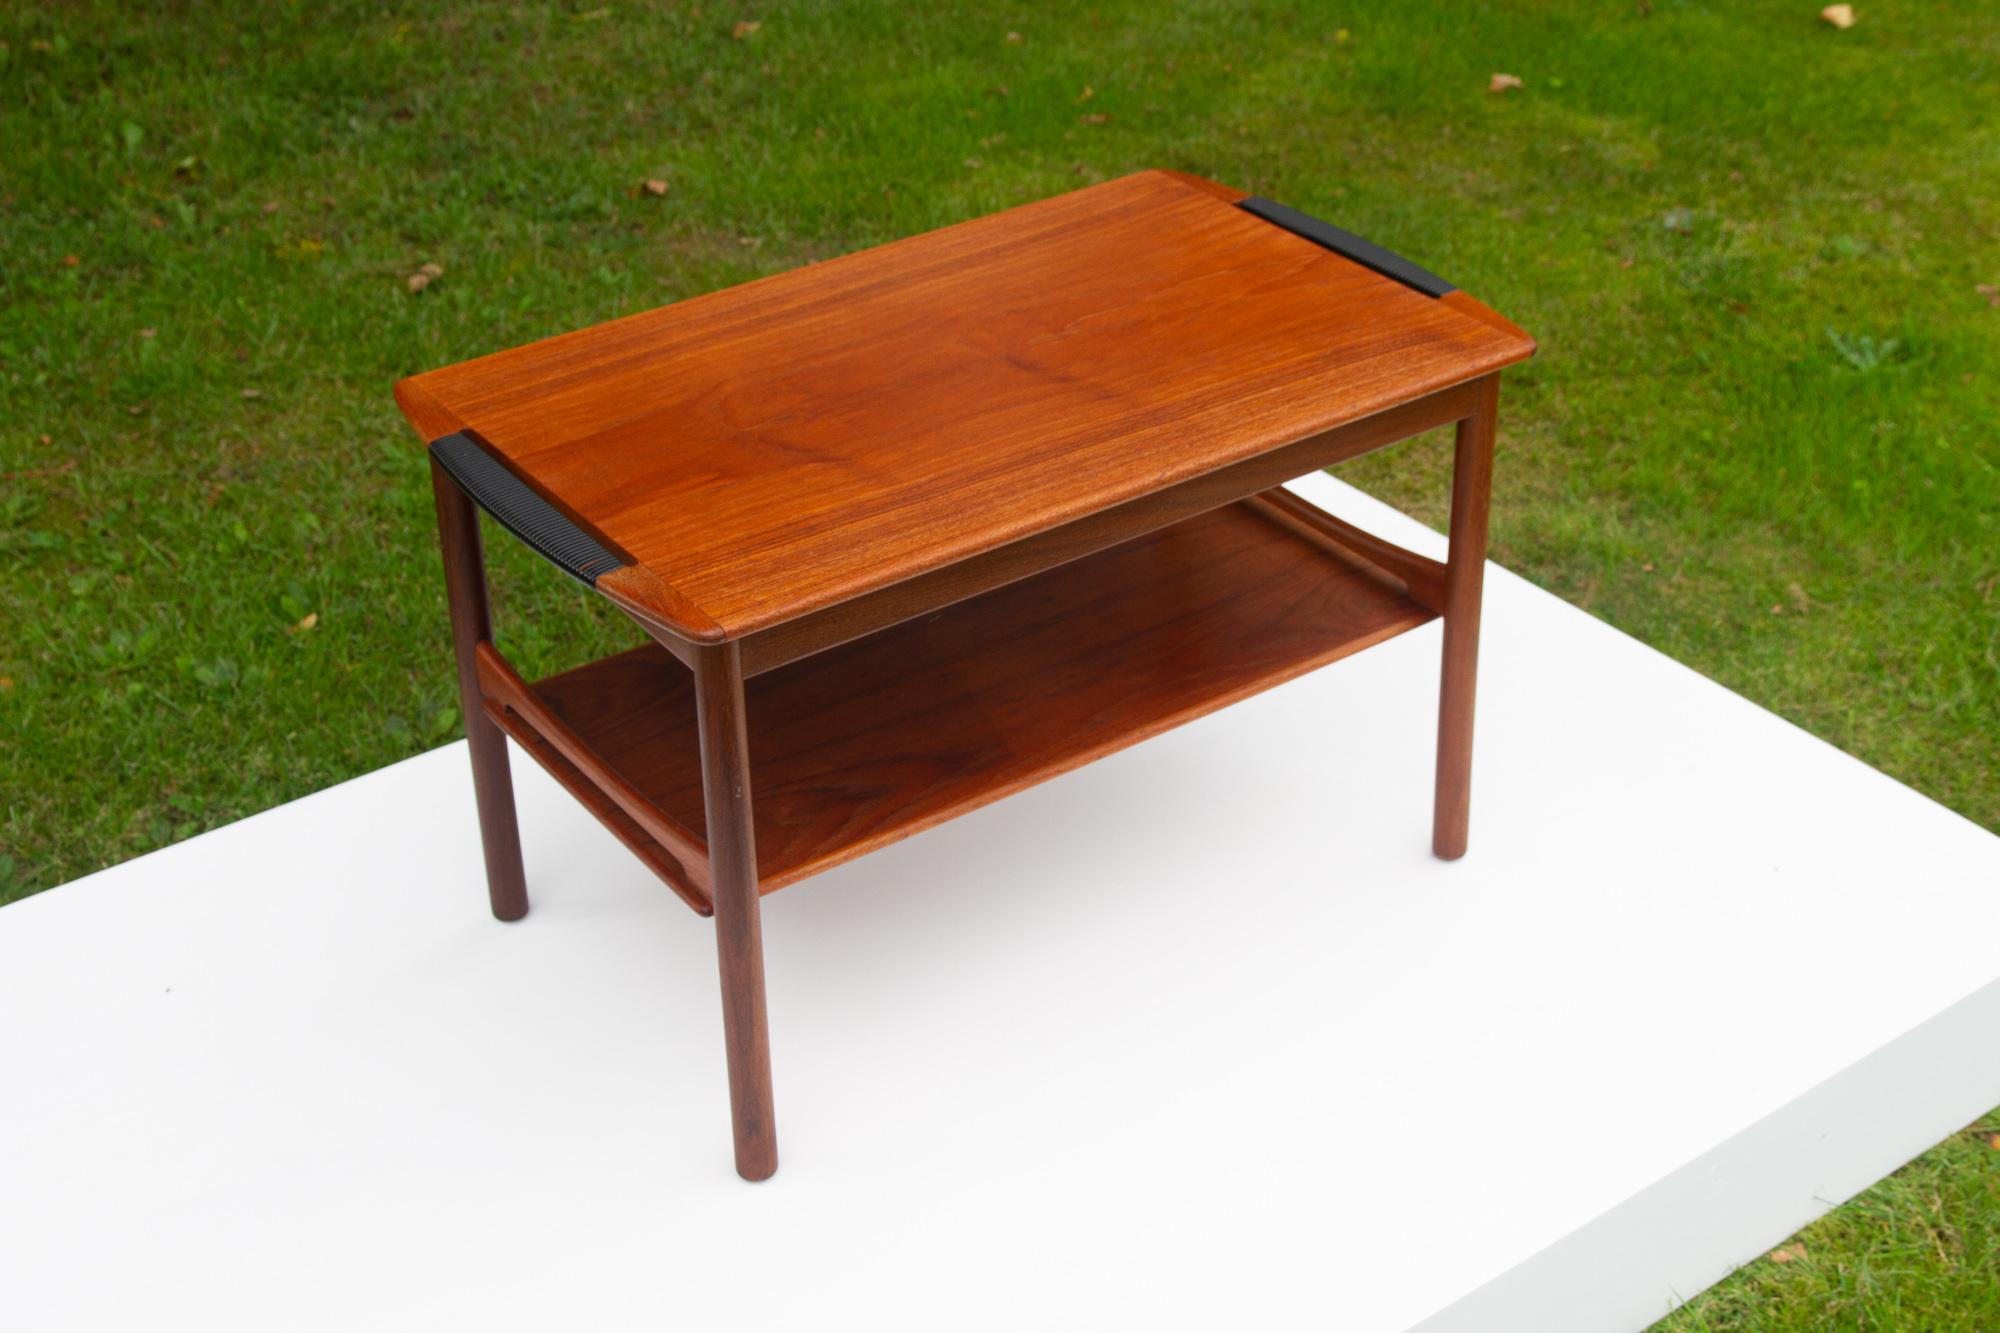 Vintage Danish teak side table, 1960s
Elegant Danish Mid-century modern side or coffee table with underlying shelf. Table top with wrapped grips makes this table easy to move around. Beautiful expressive bookmatched veneer and frame in solid teak.